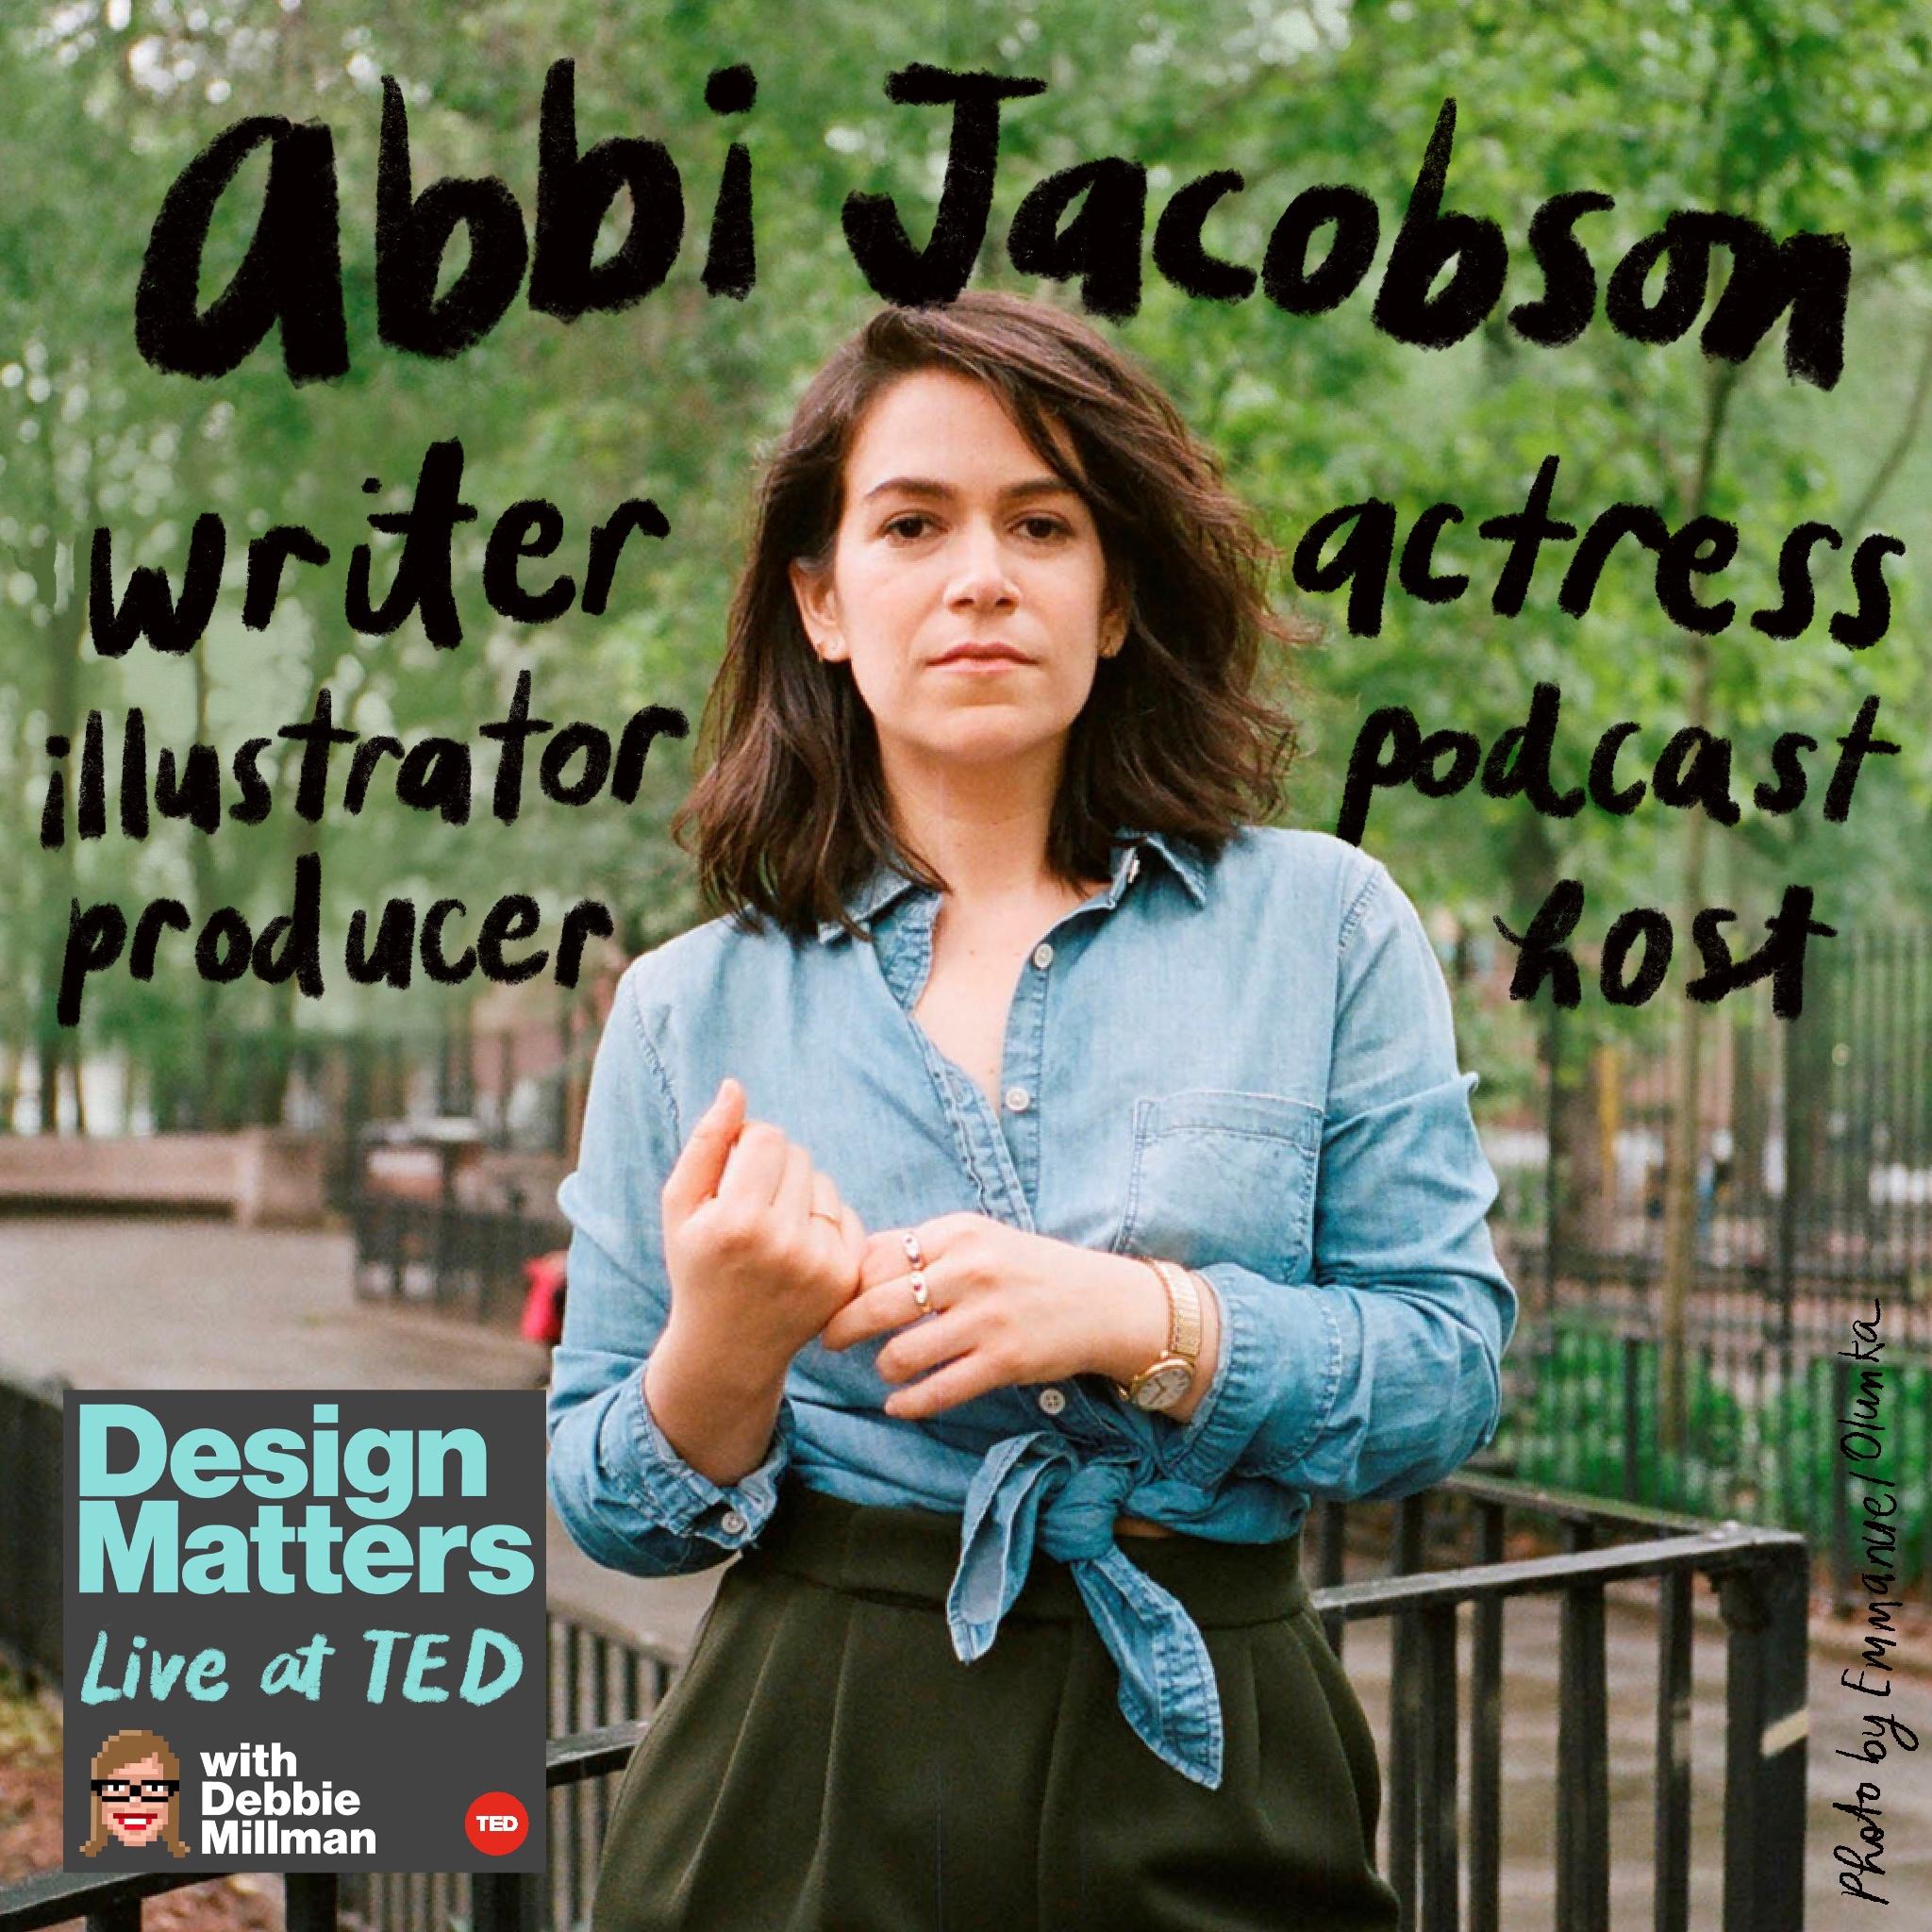 Thumbnail for "Abbi Jacobson with Guest Host Dylan Marron".